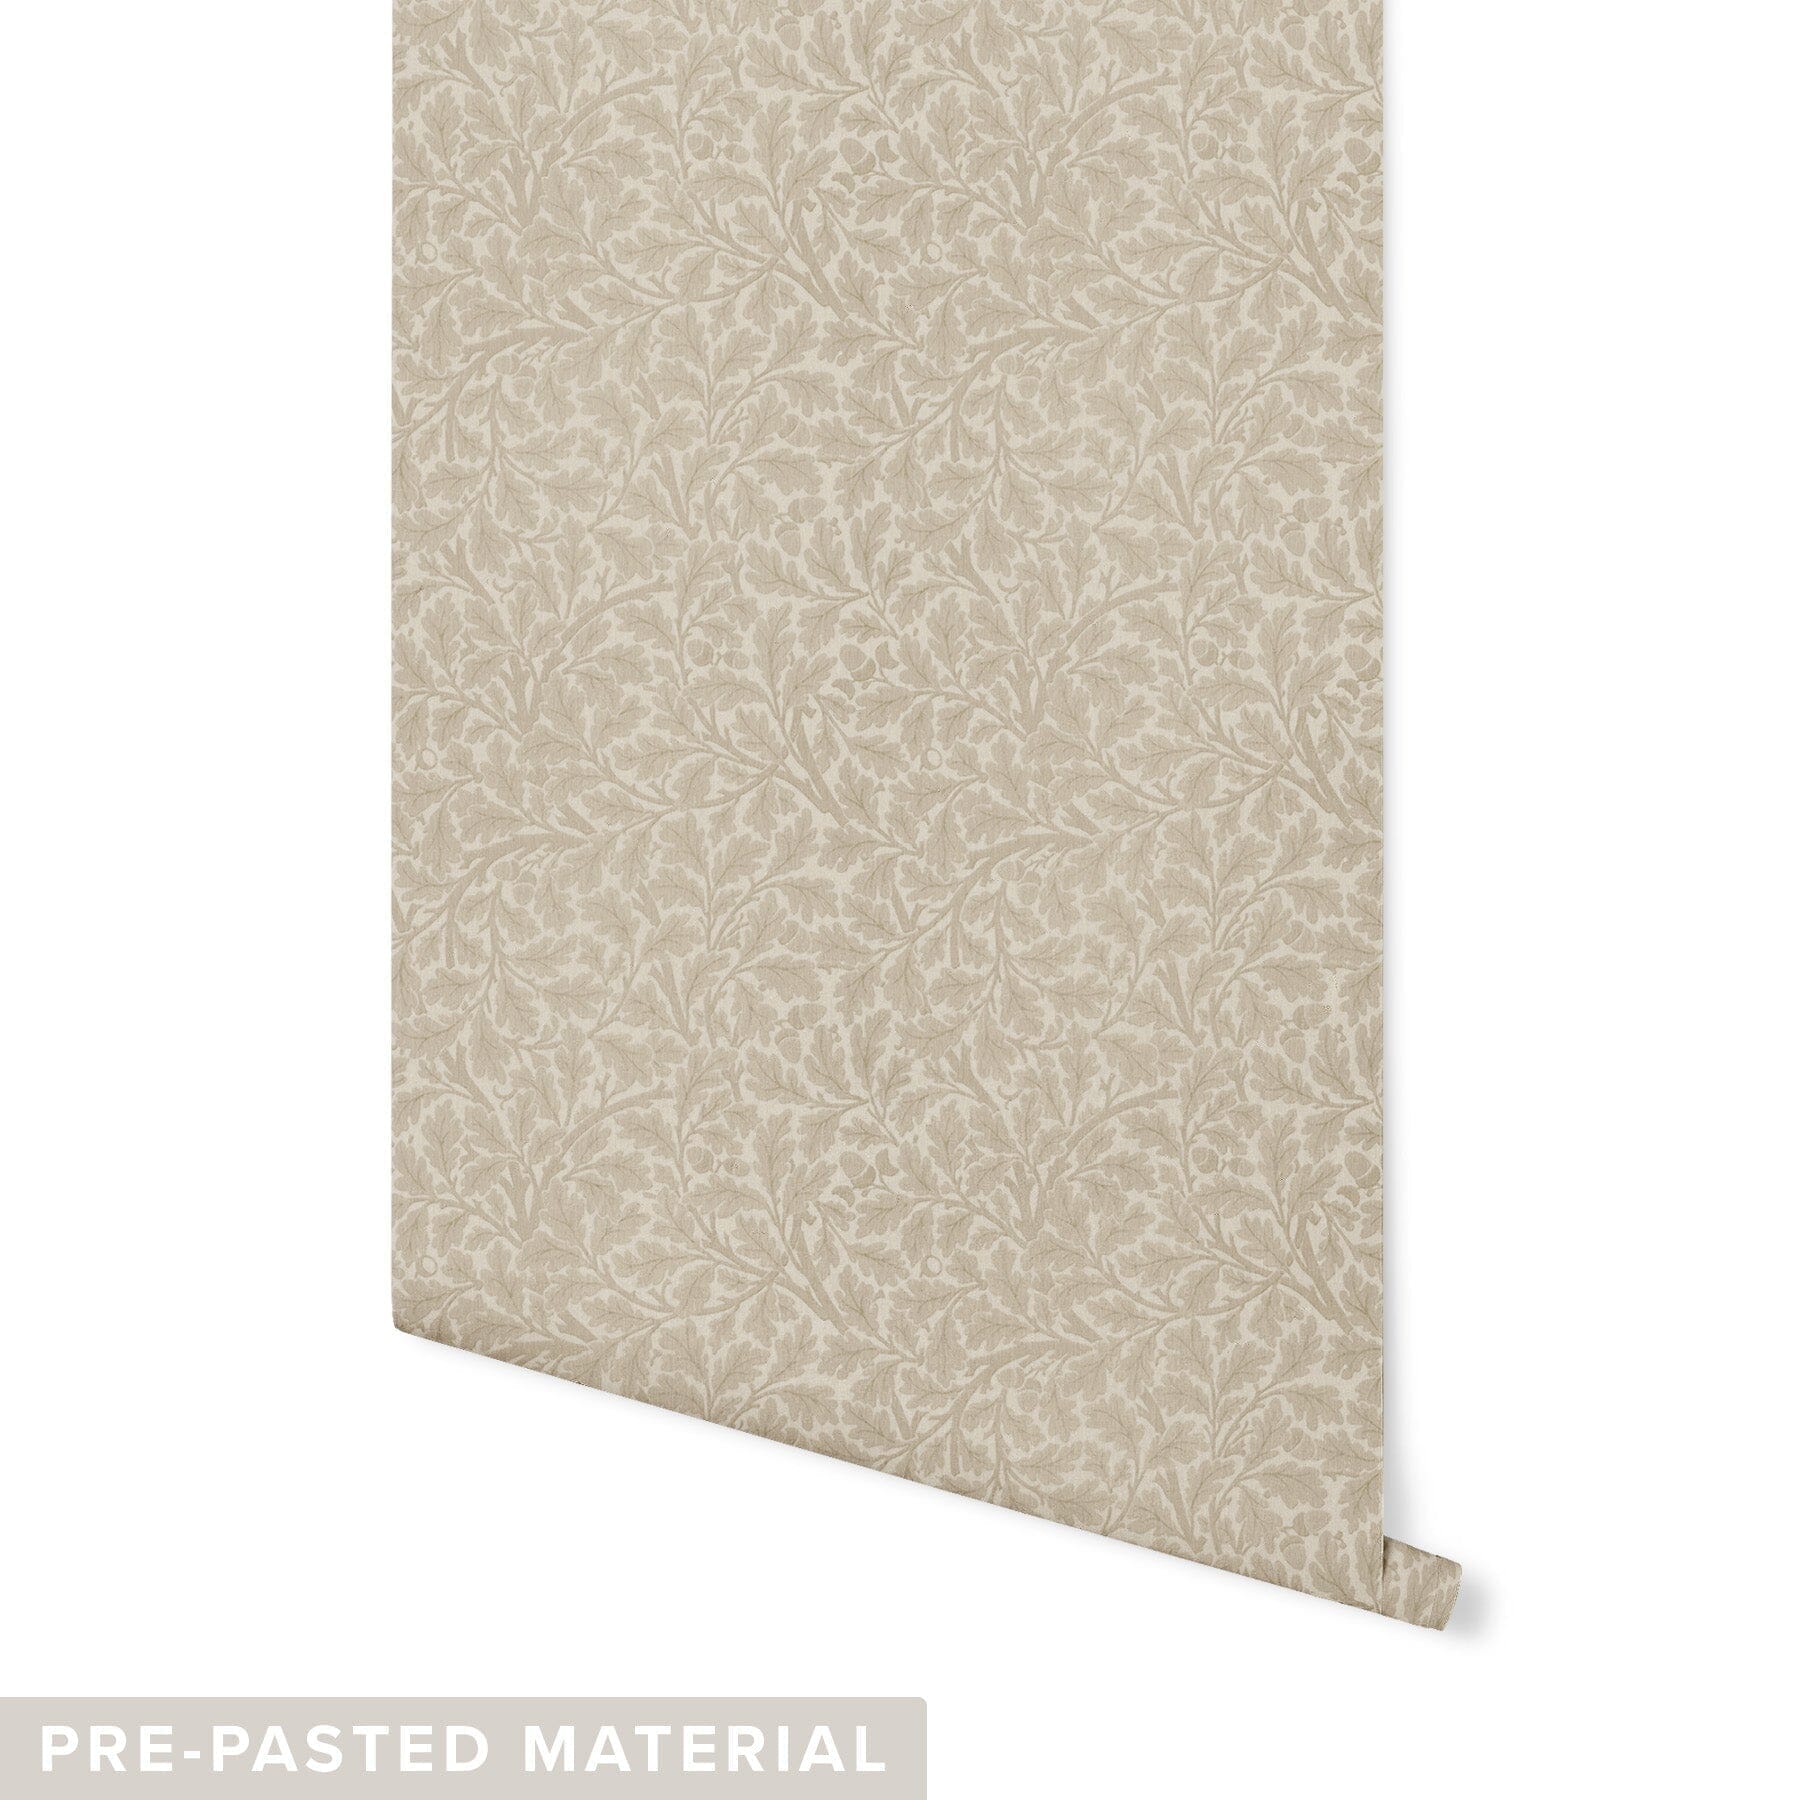 Oak Tree Wallpaper Wallpaper Mia Parres Pre-pasted Maple Leaf Brown DOUBLE ROLL : 46" X 4 FEET